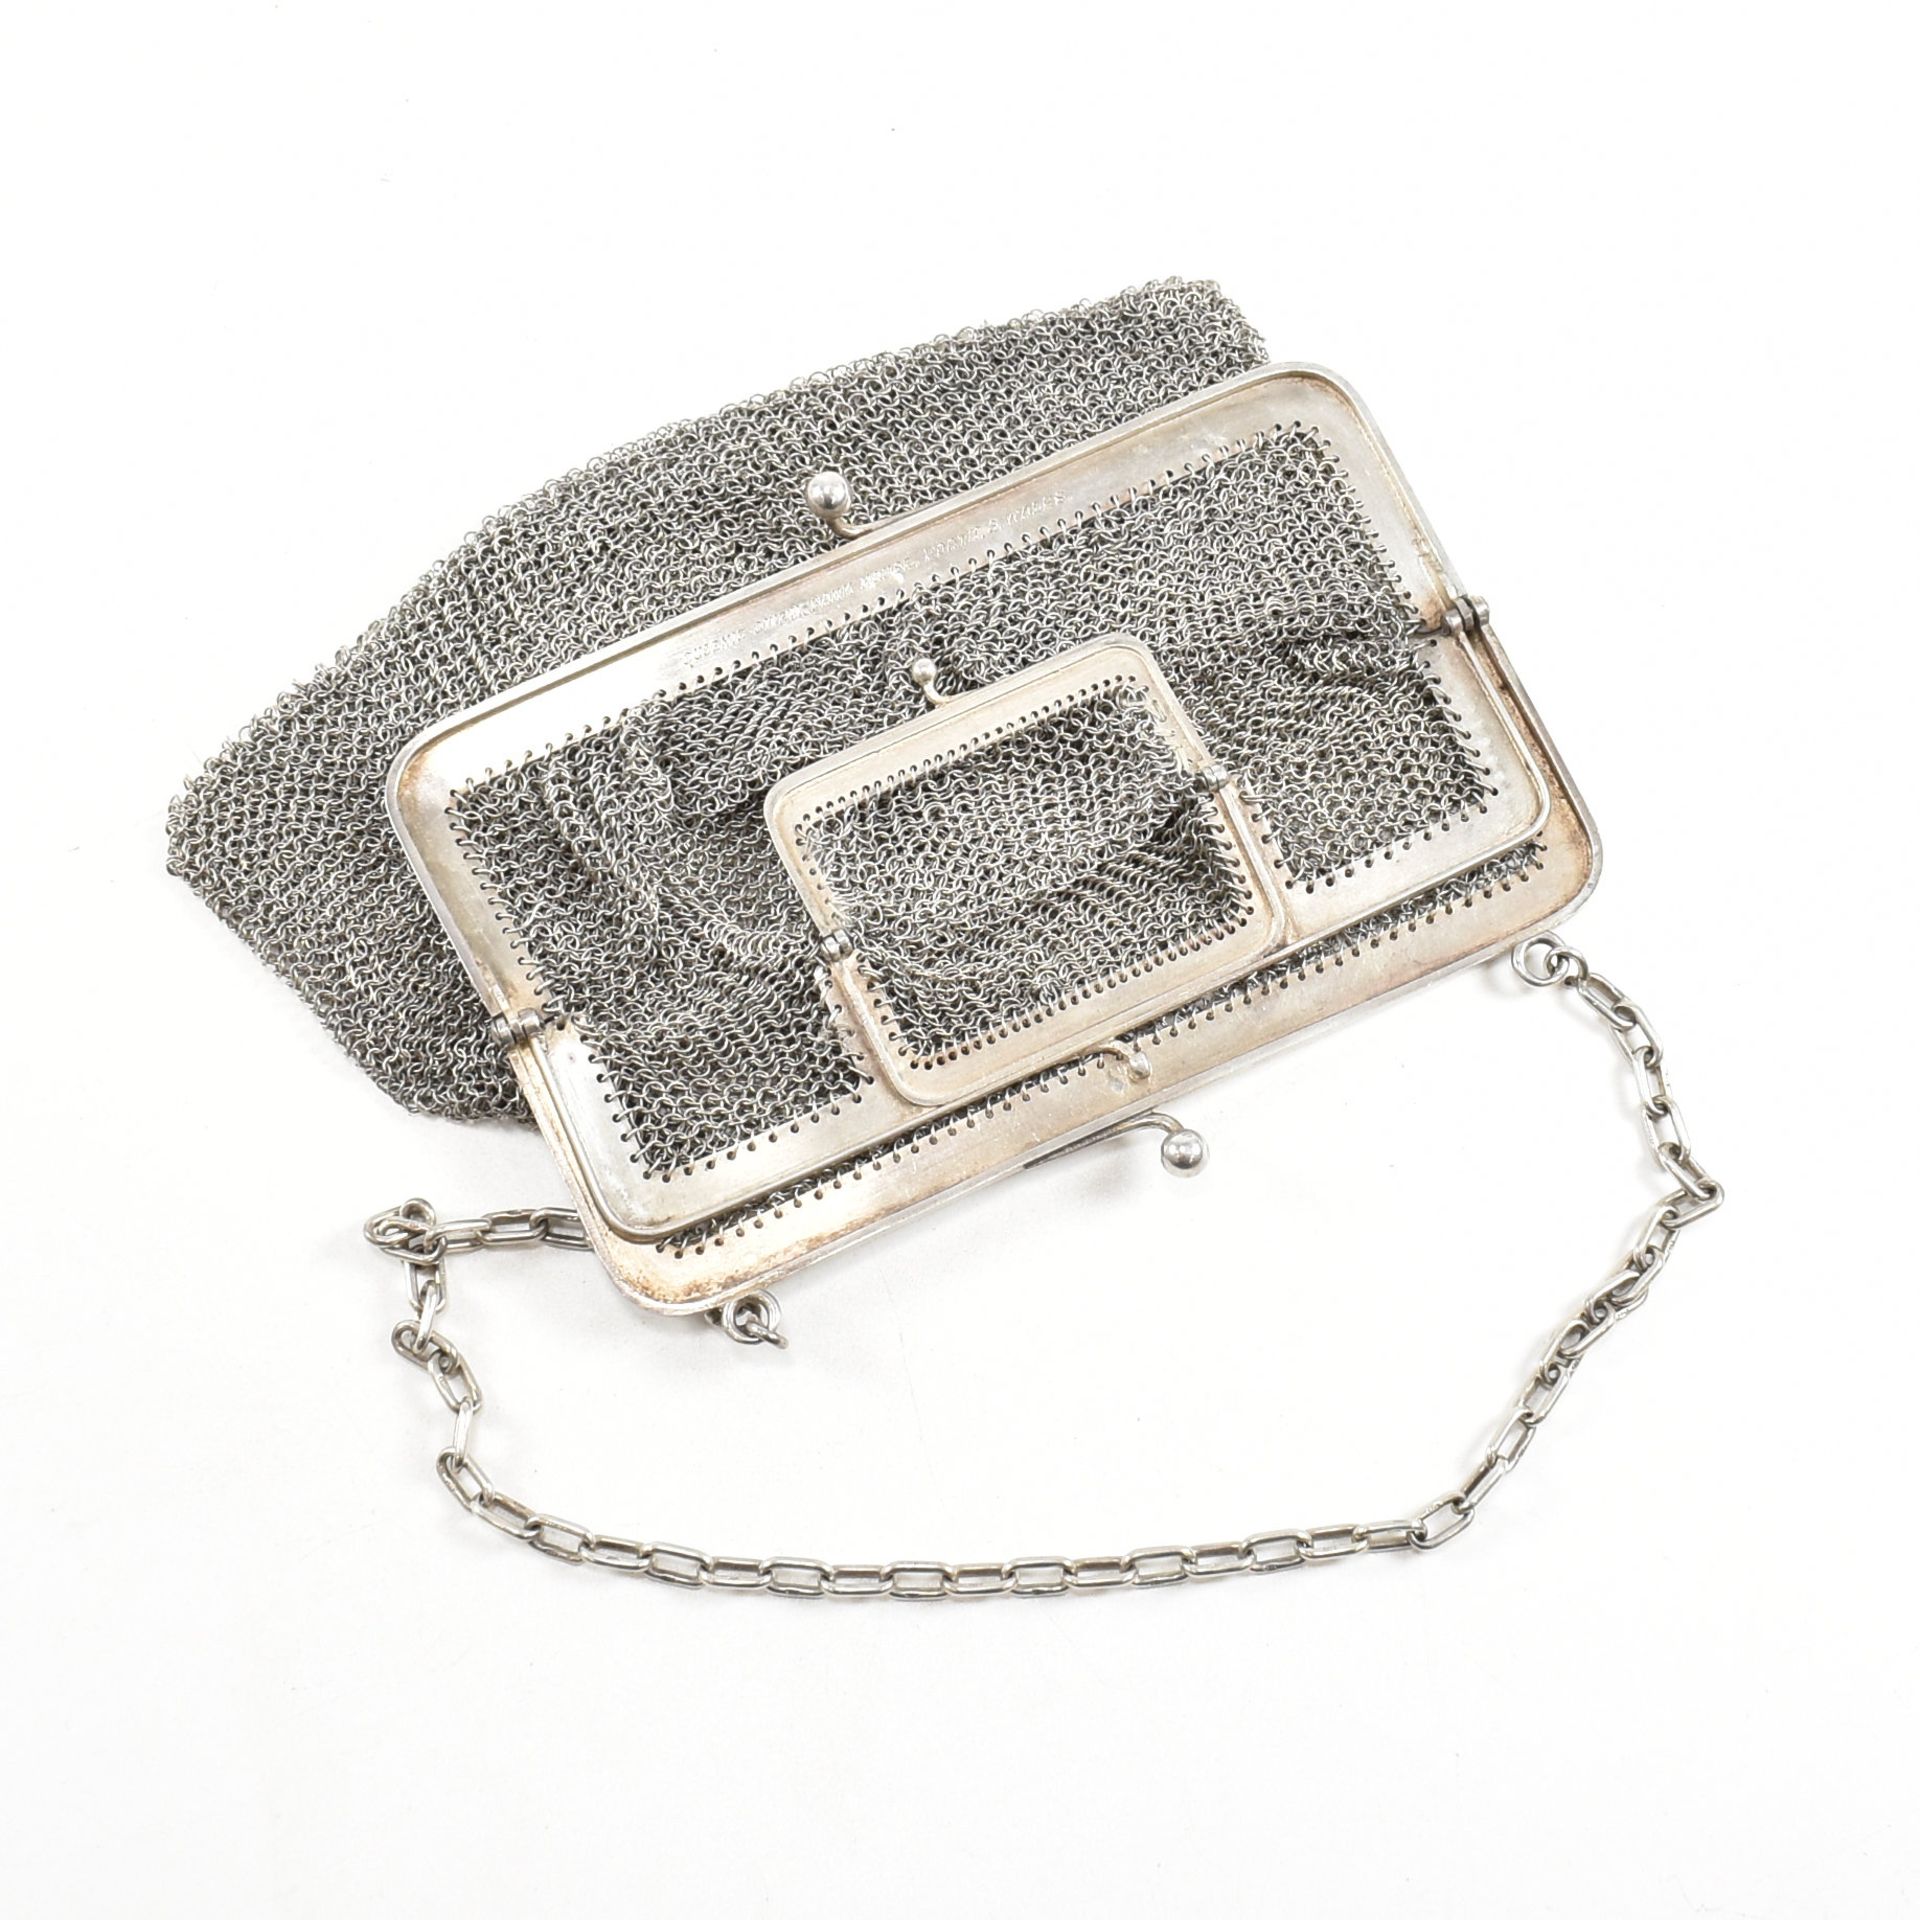 EARLY 20TH CENTURY 925 SILVER MESH EVENING BAG - Image 5 of 8